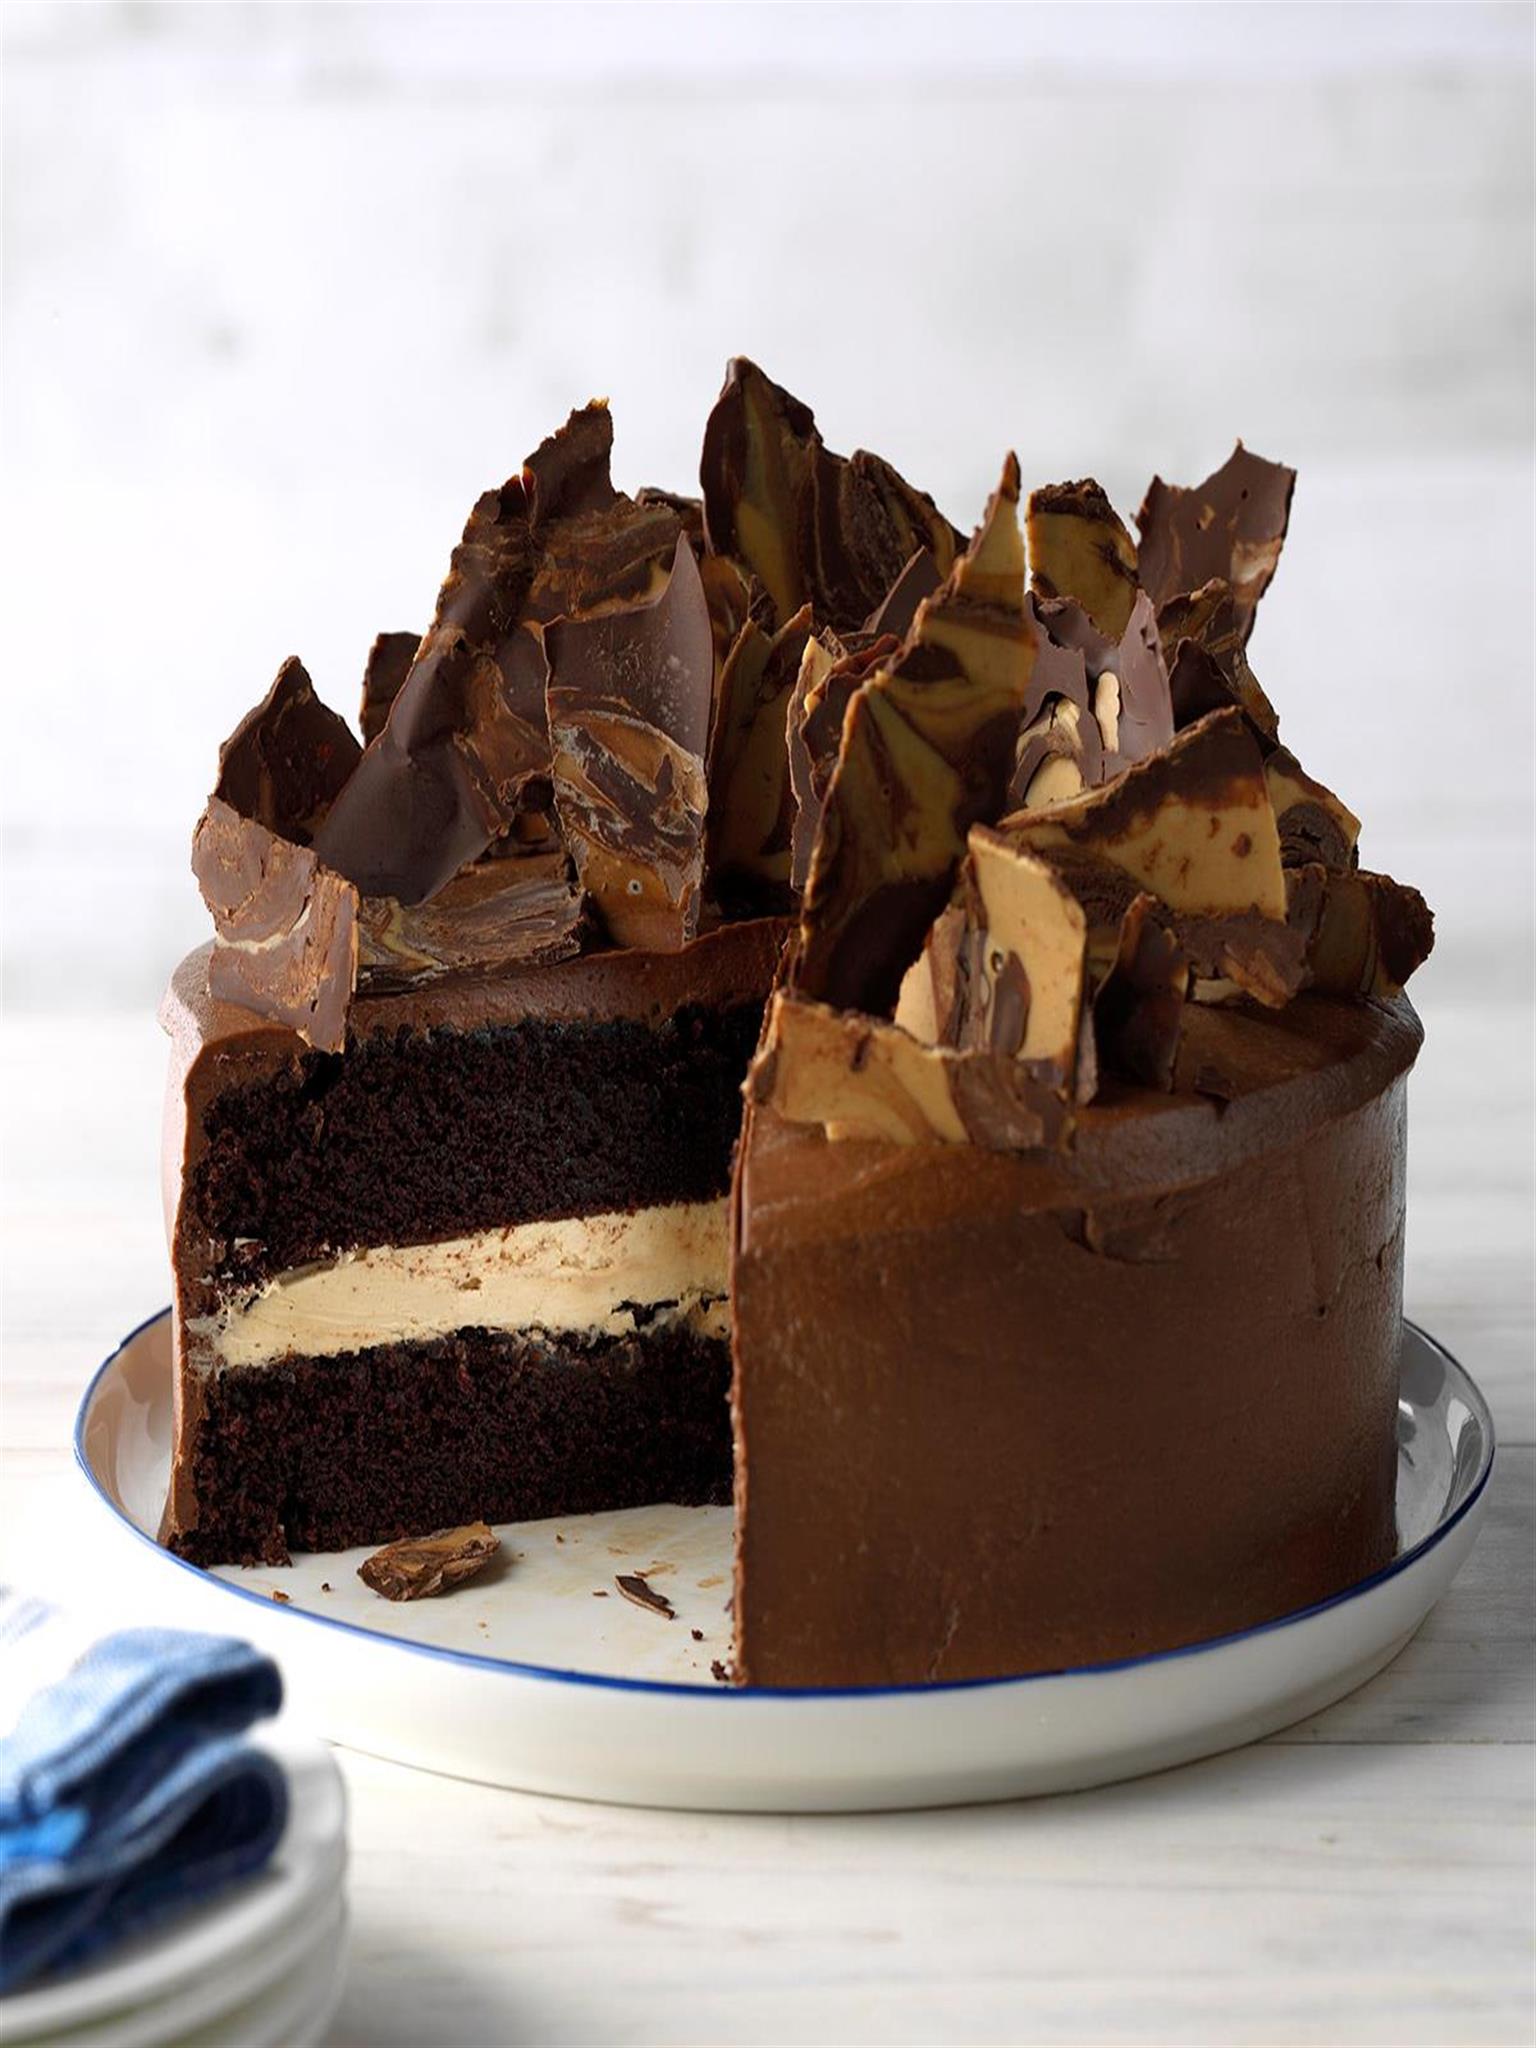 Chocolate Peanut Butter Layer Cake - The Cake Chica